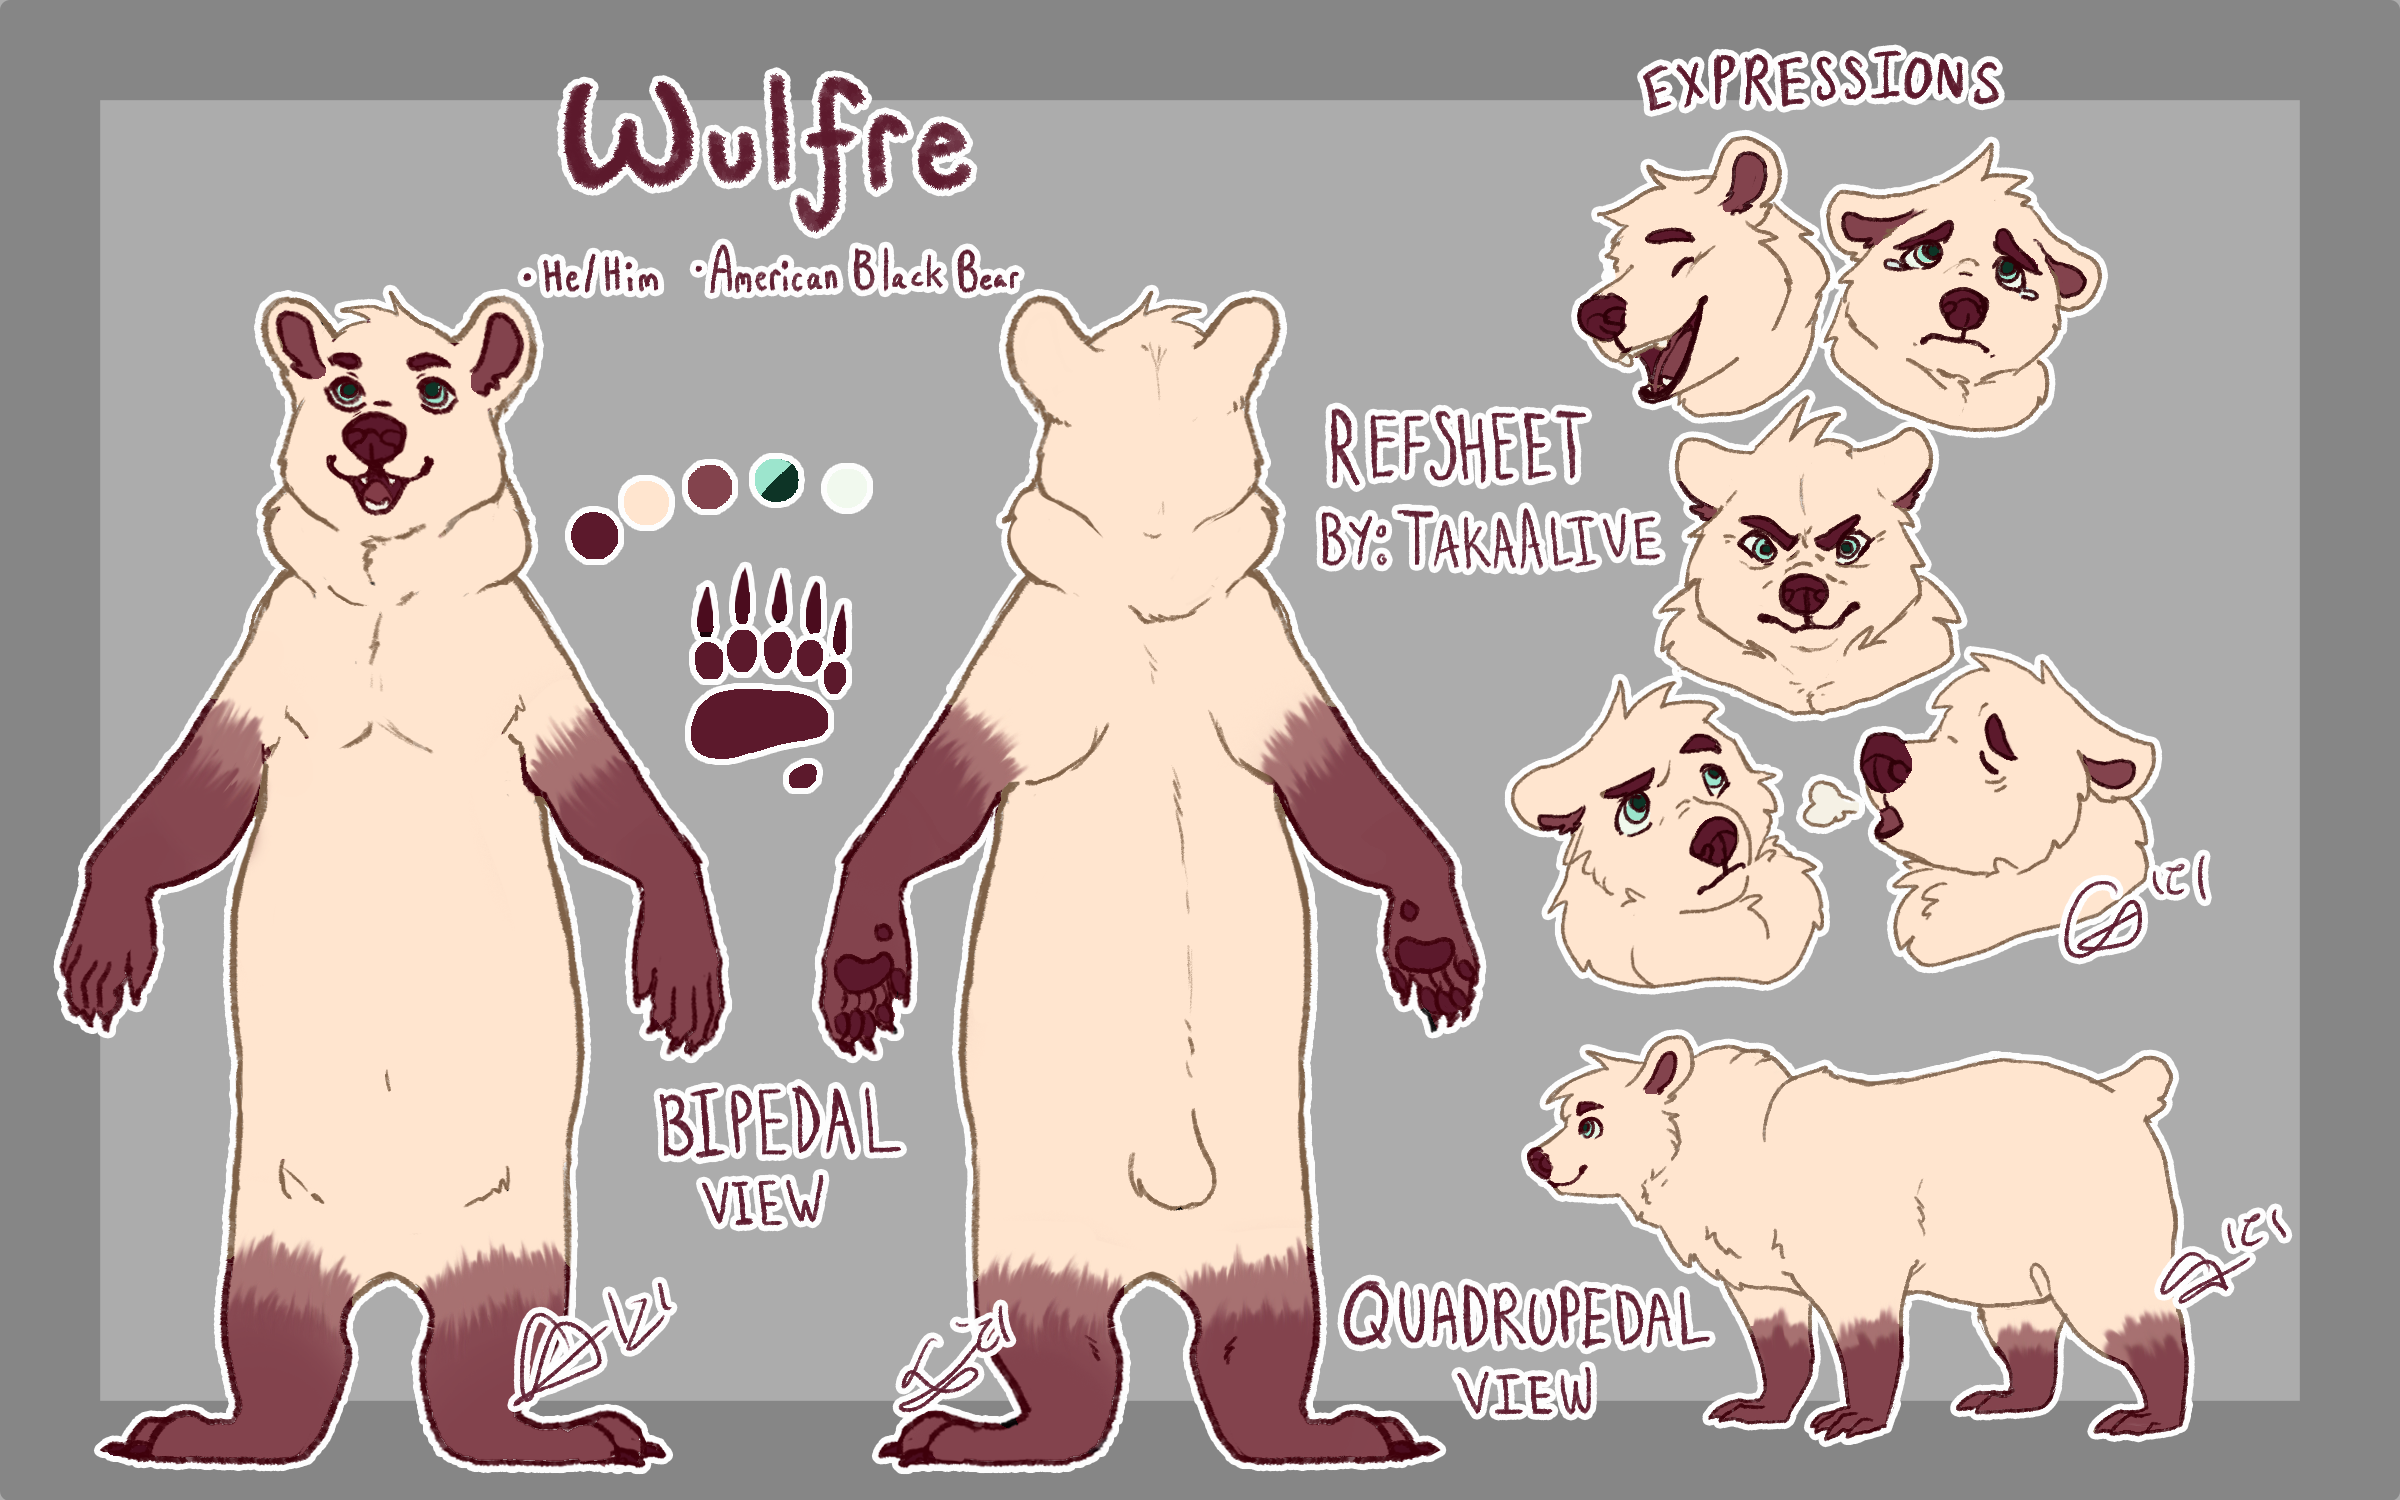 Reference sheet.